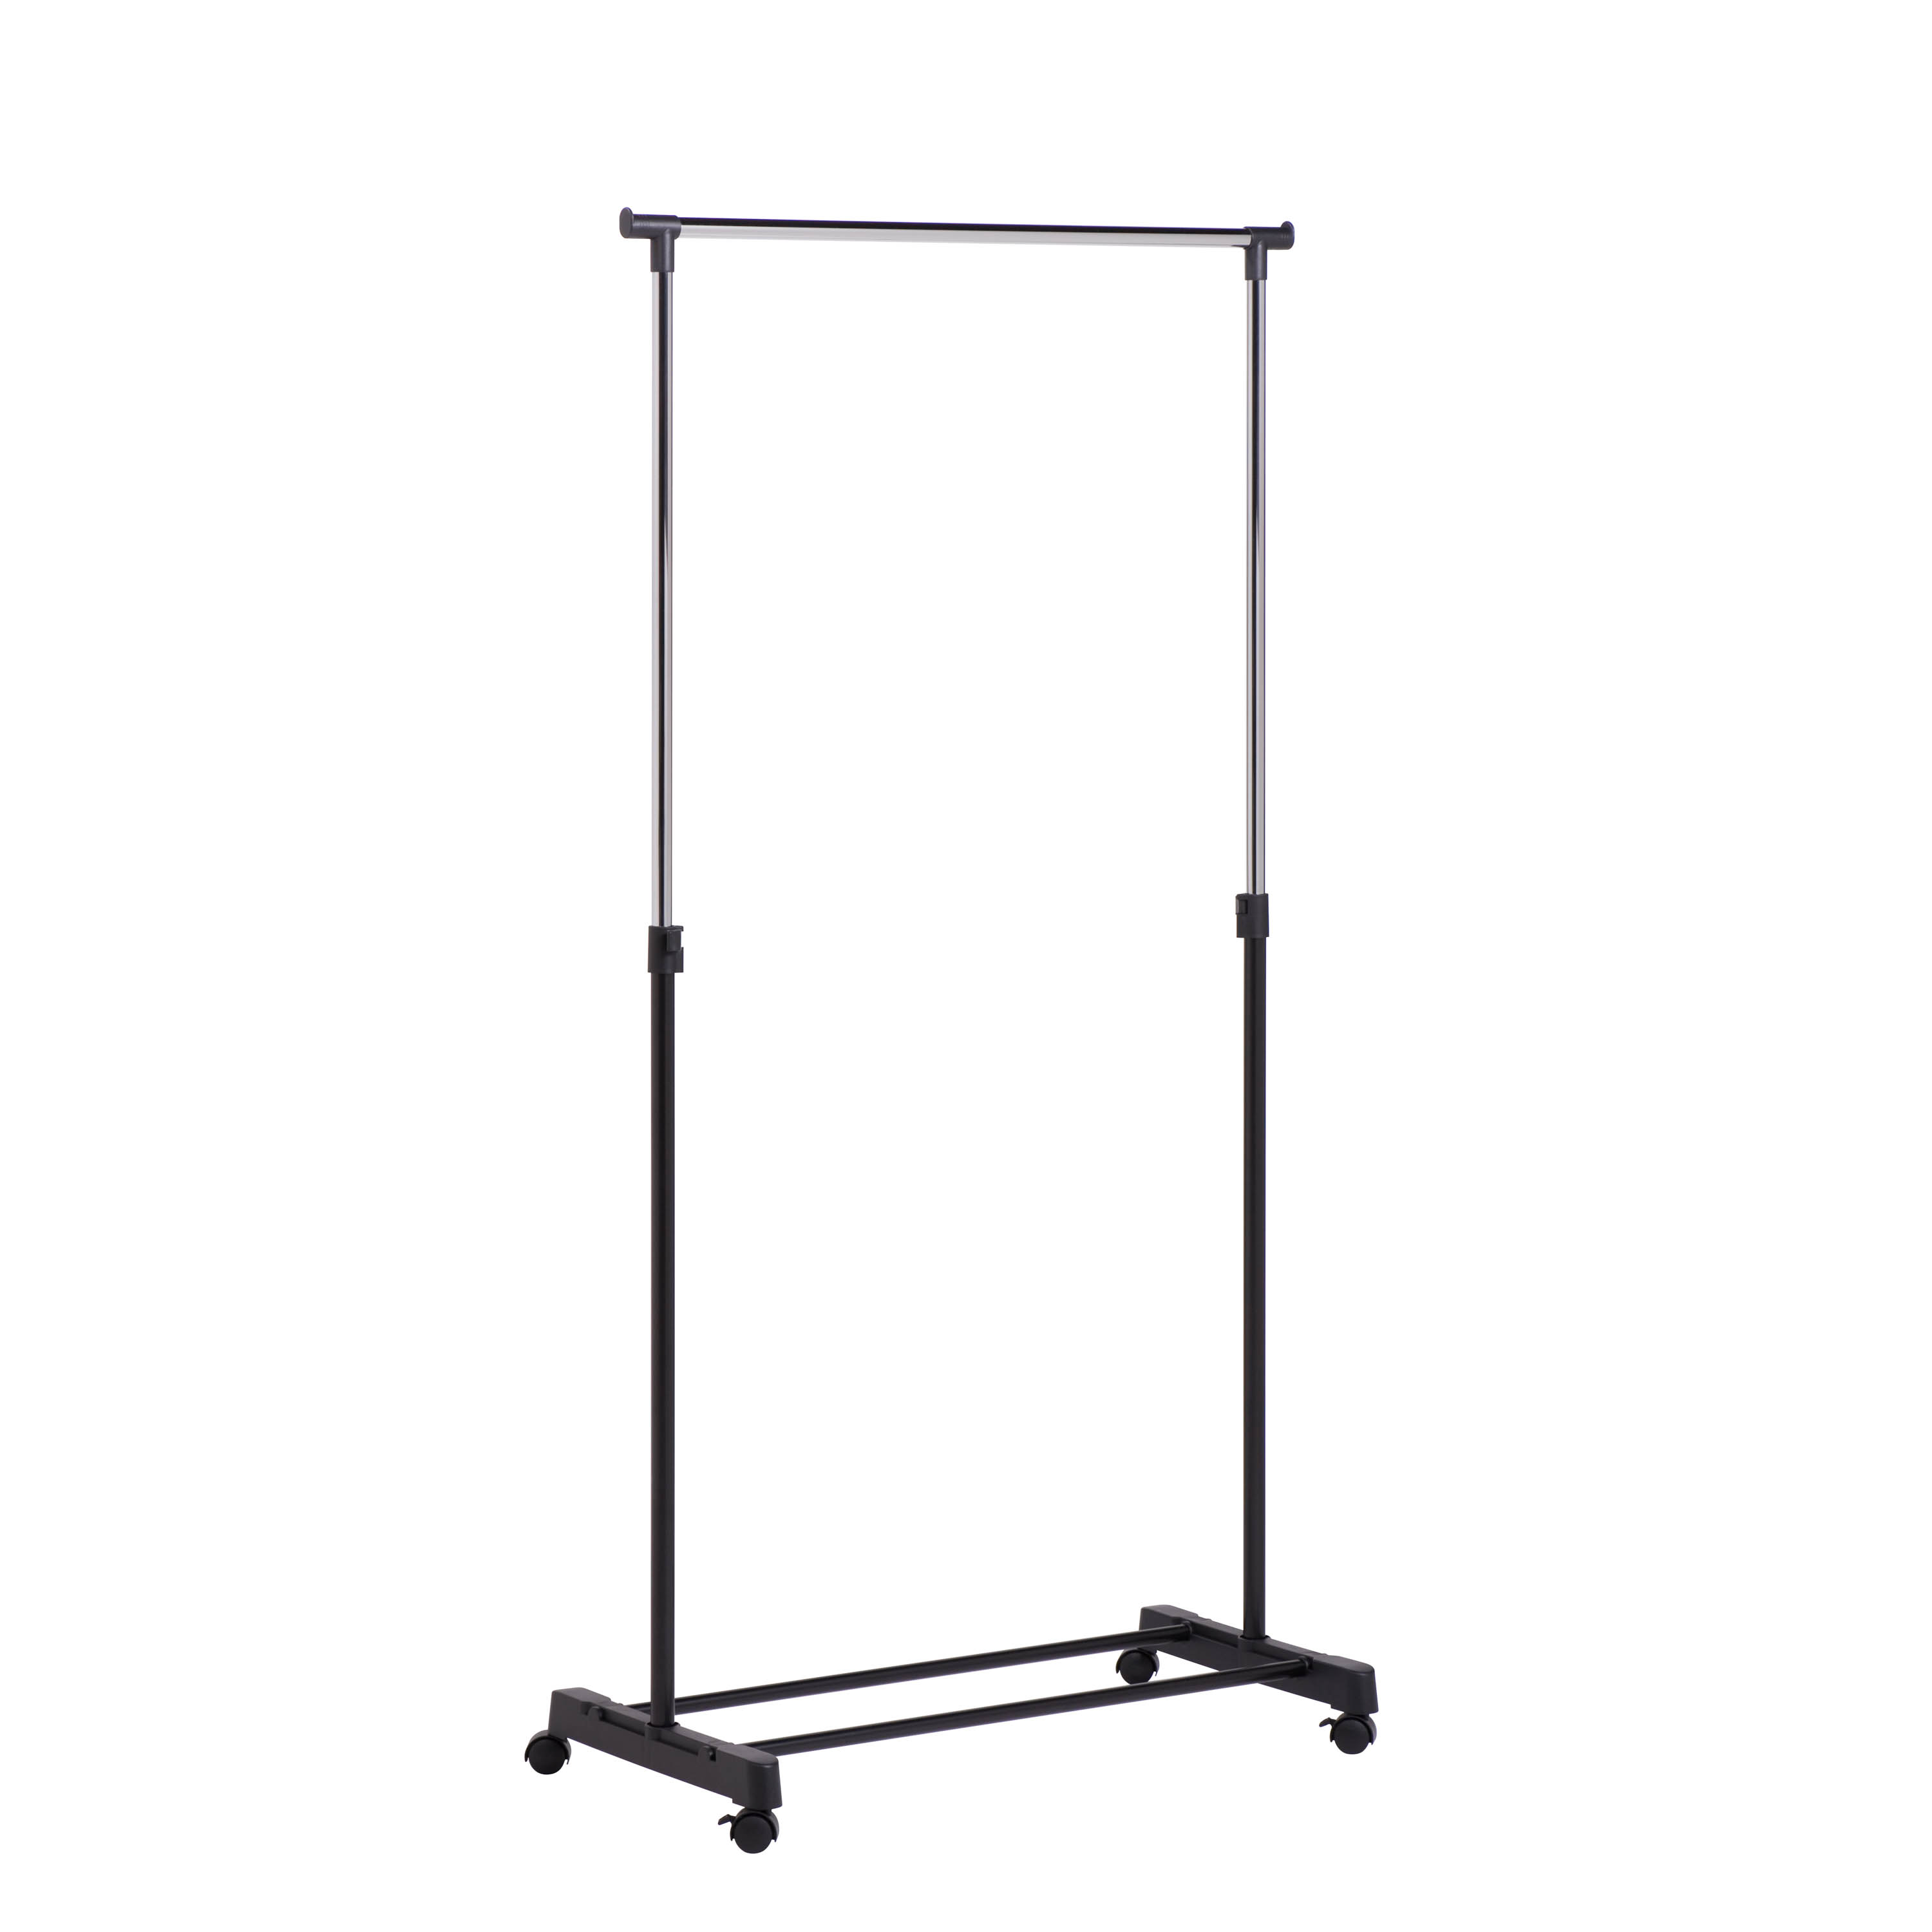 Honey-Can-Do Steel Single Rod Adjustable Height Rolling Clothes Rack, Chrome/Black - image 3 of 6